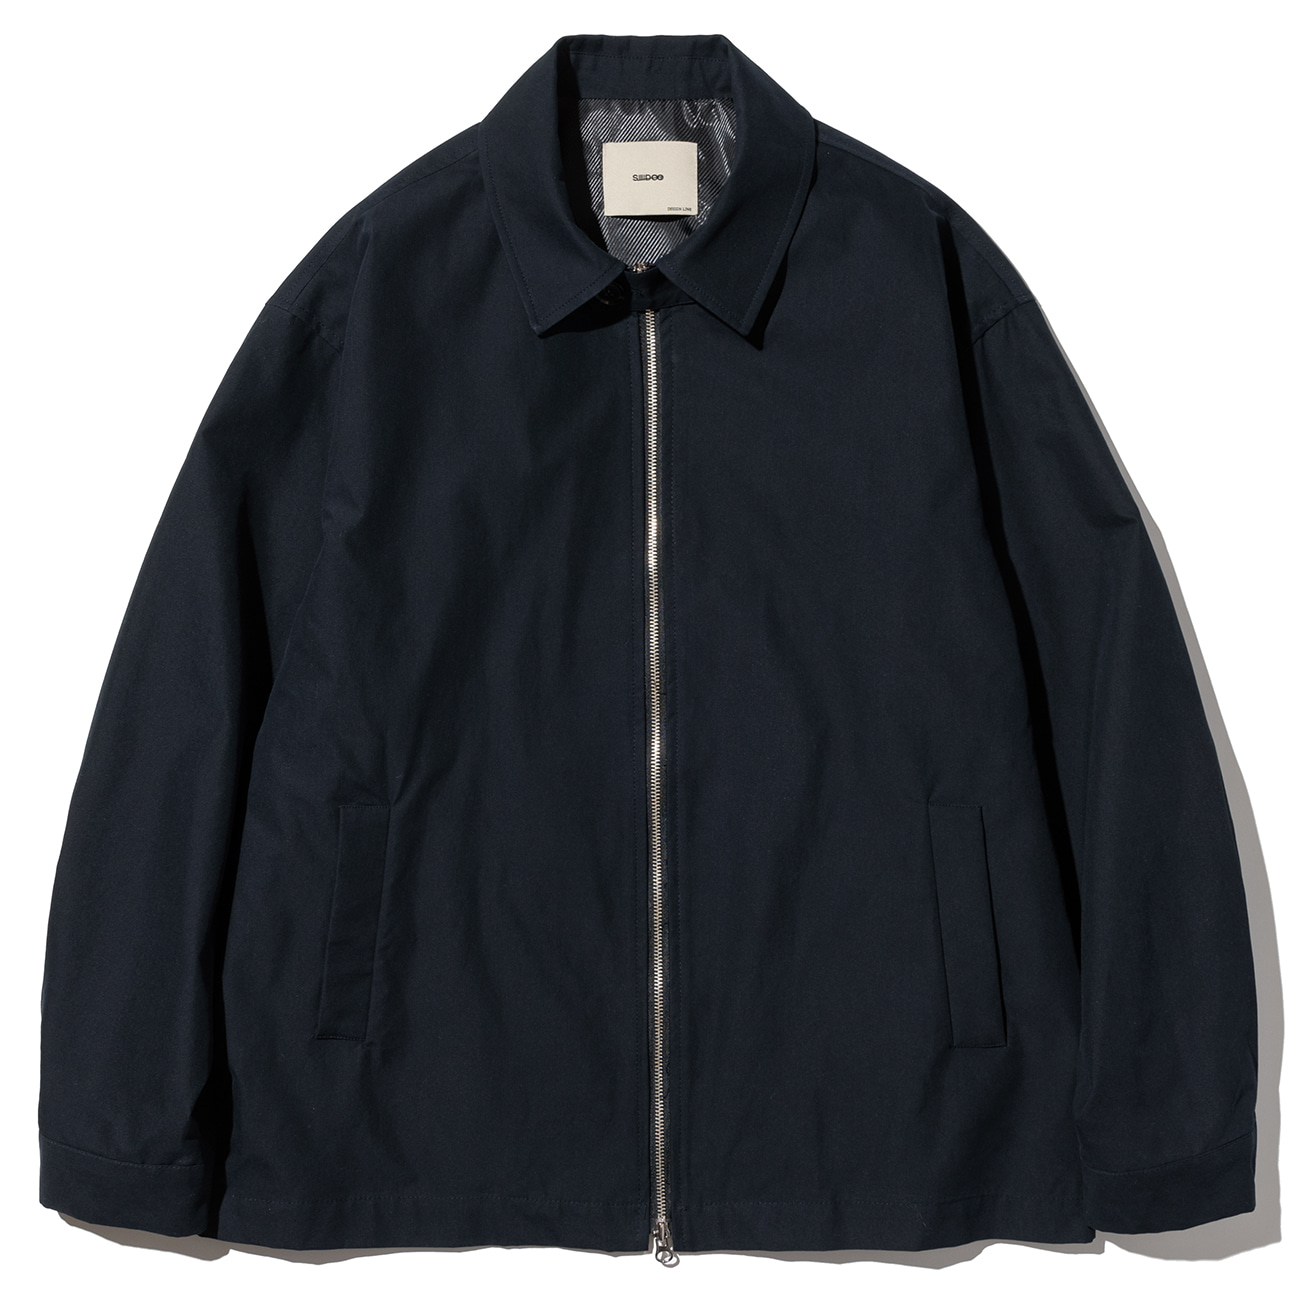 SDDL TWO WAY ZIP-UP MINIMAL JACKET #1 (6th restock)